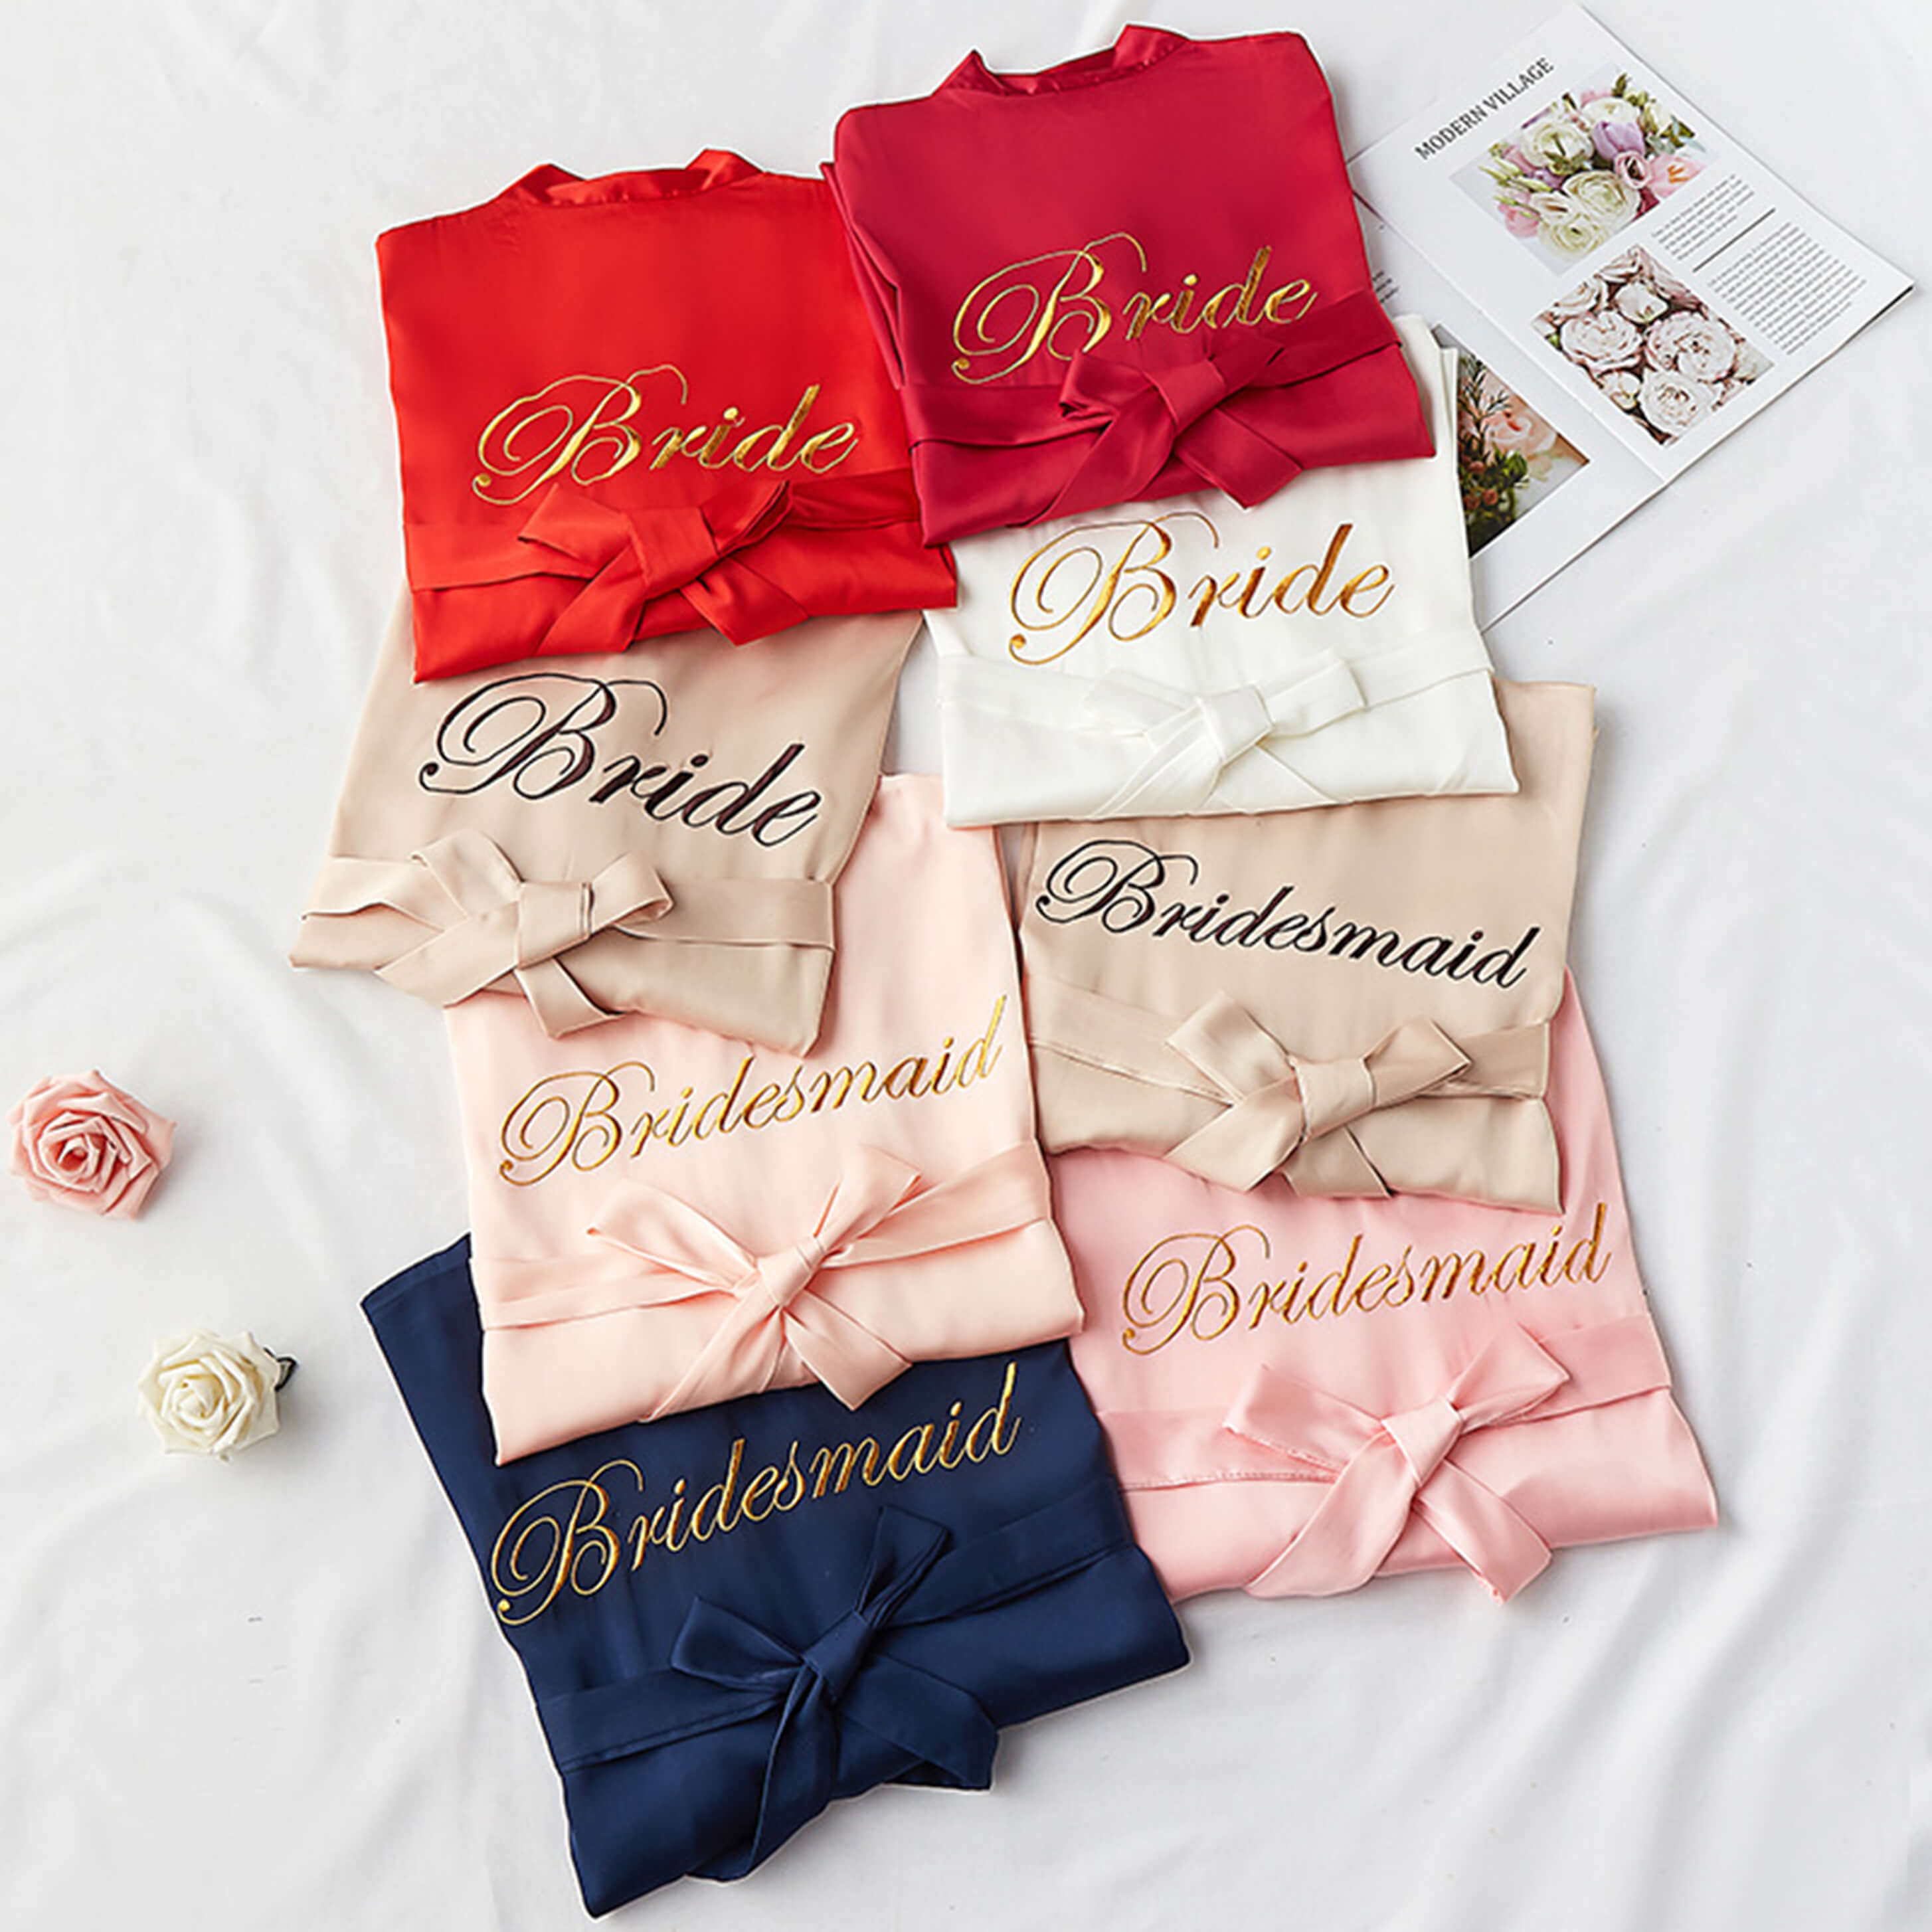 Tingn Bridesmaid Gifts Flower Girl Gifts for Wedding Day - Bridesmaid Proposal Gifts Bridal Shower Gift Bride to Be Maid of Honor Matron of Honor